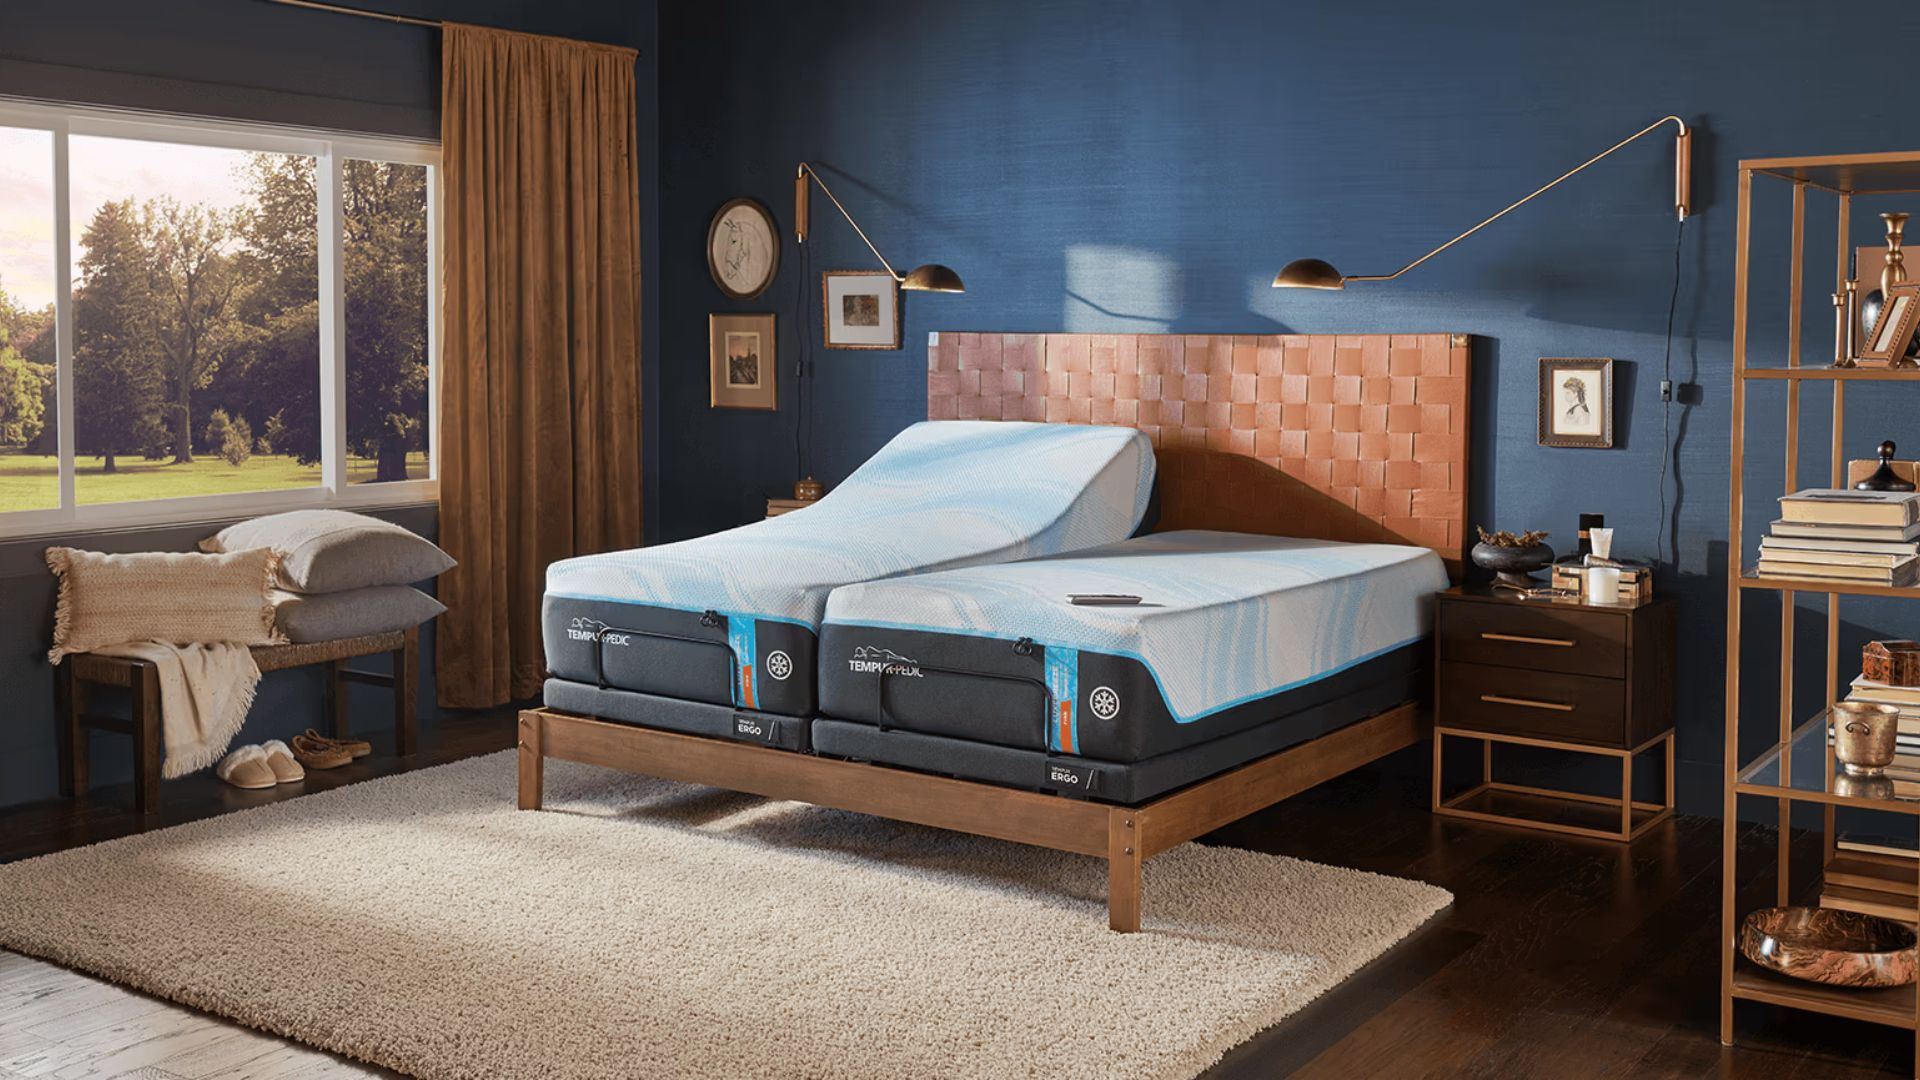 A blue bedroom containing the Tempur-Ergo smart in a split king